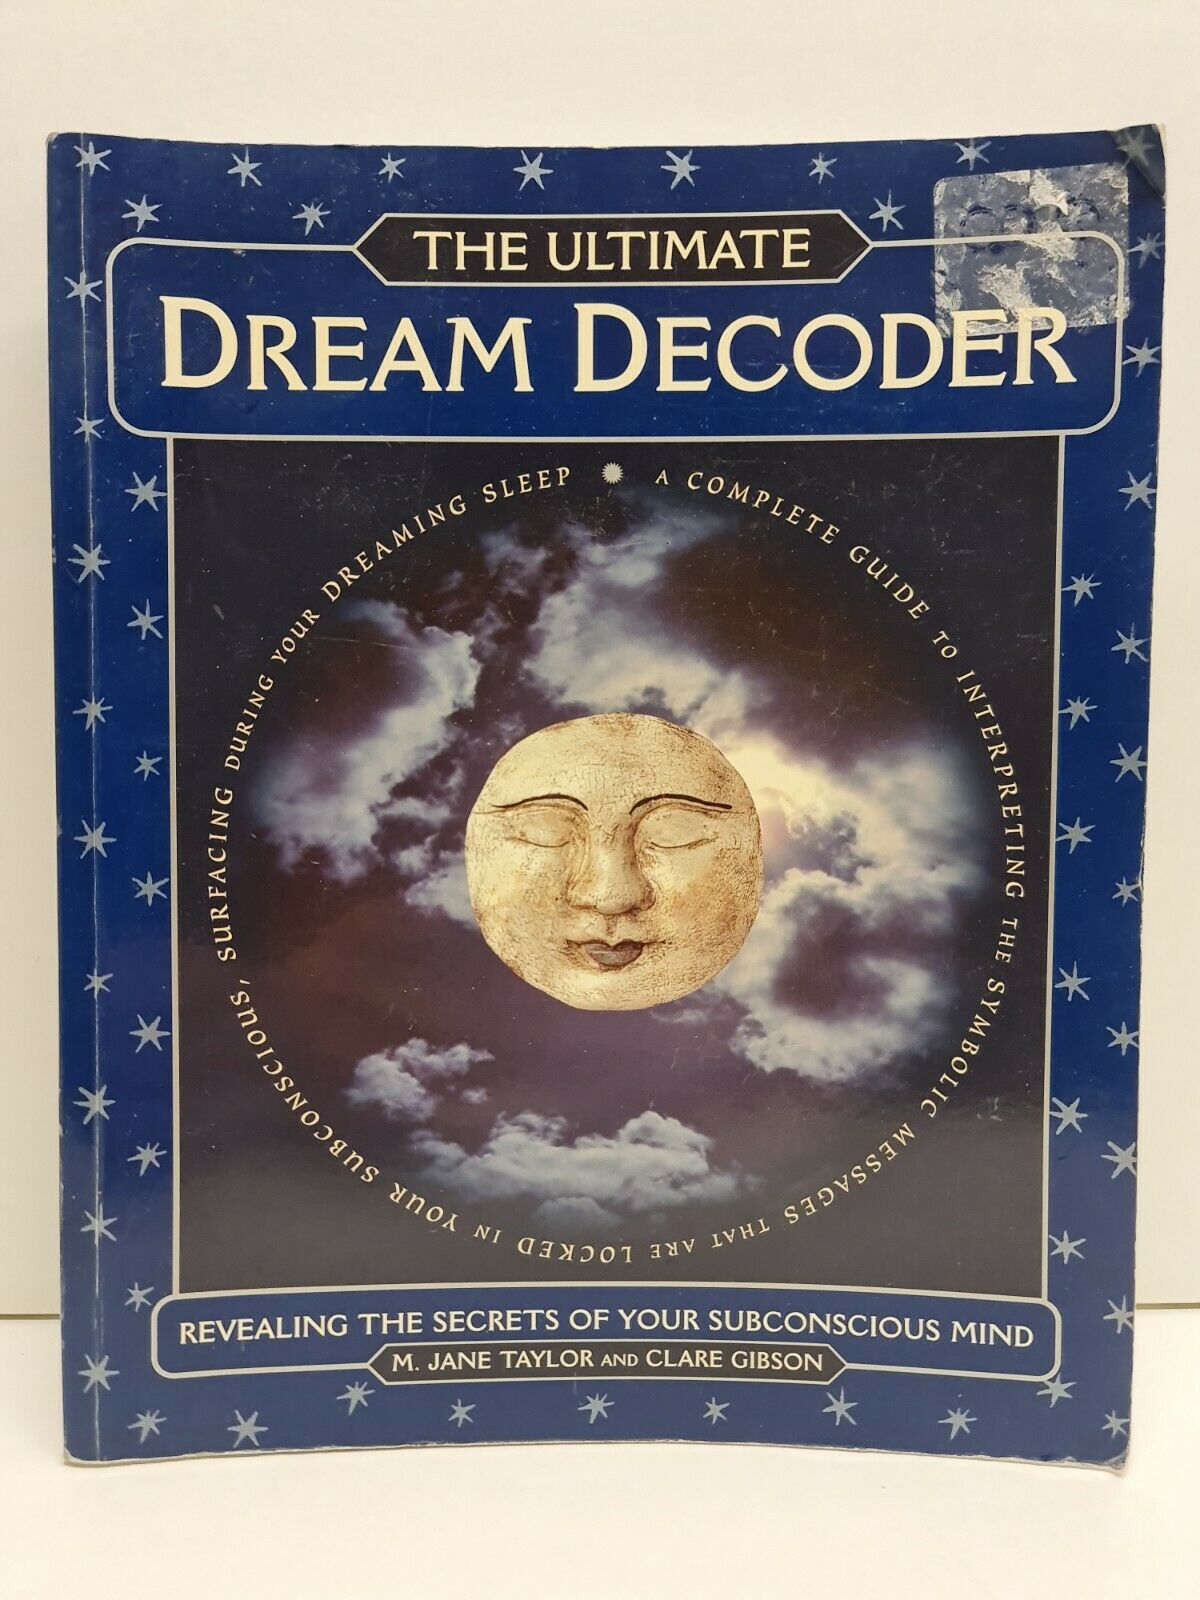 The Ultimate Dream Decoder by Jane Taylor & Clare Gibson